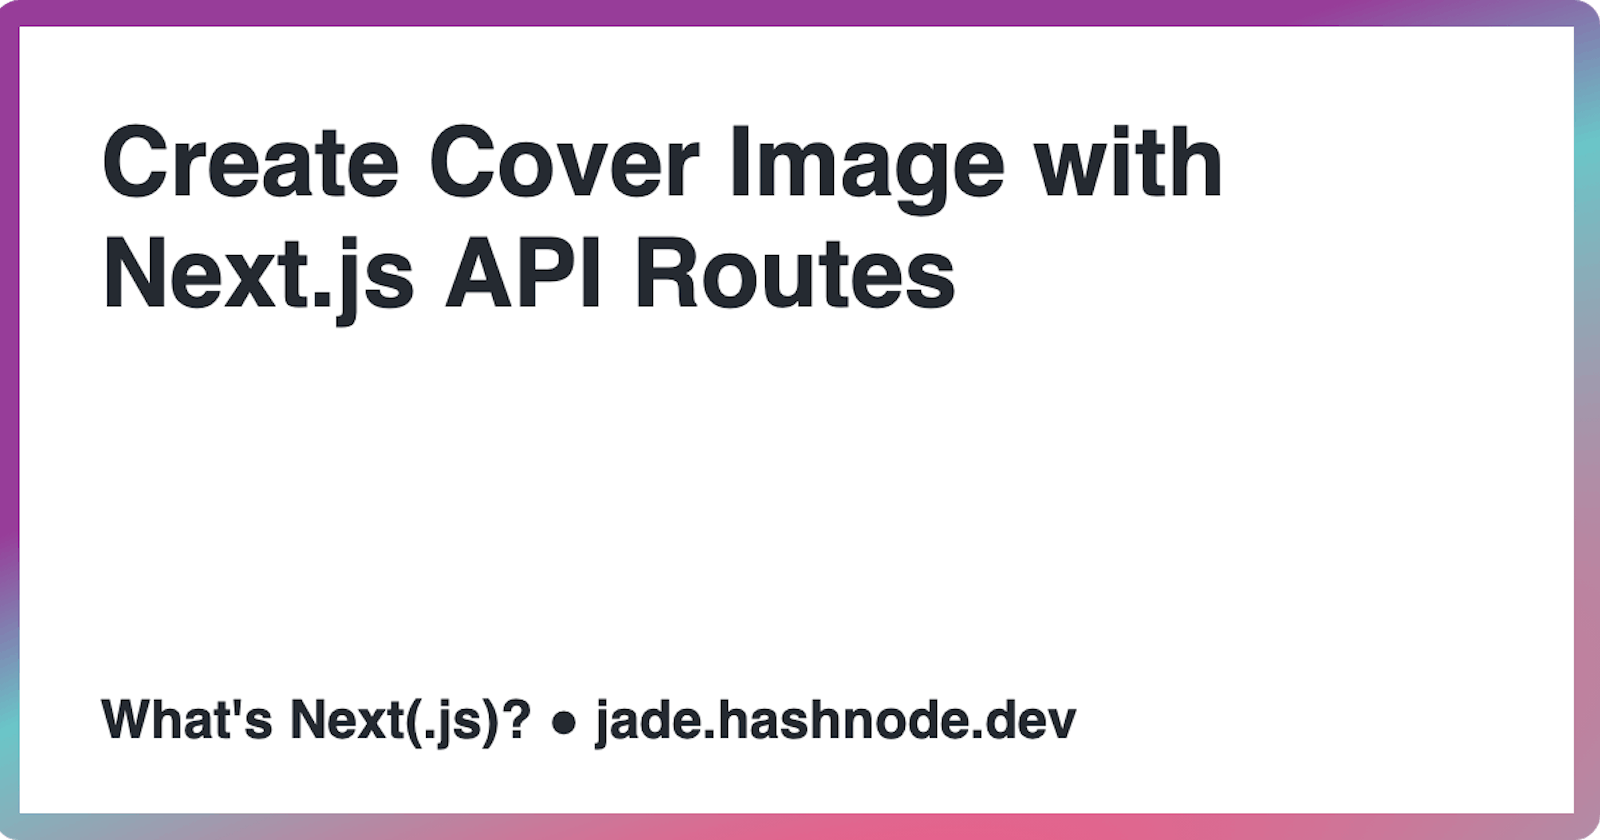 What's Next(.js)? | Create Cover Image with Next.js API Routes